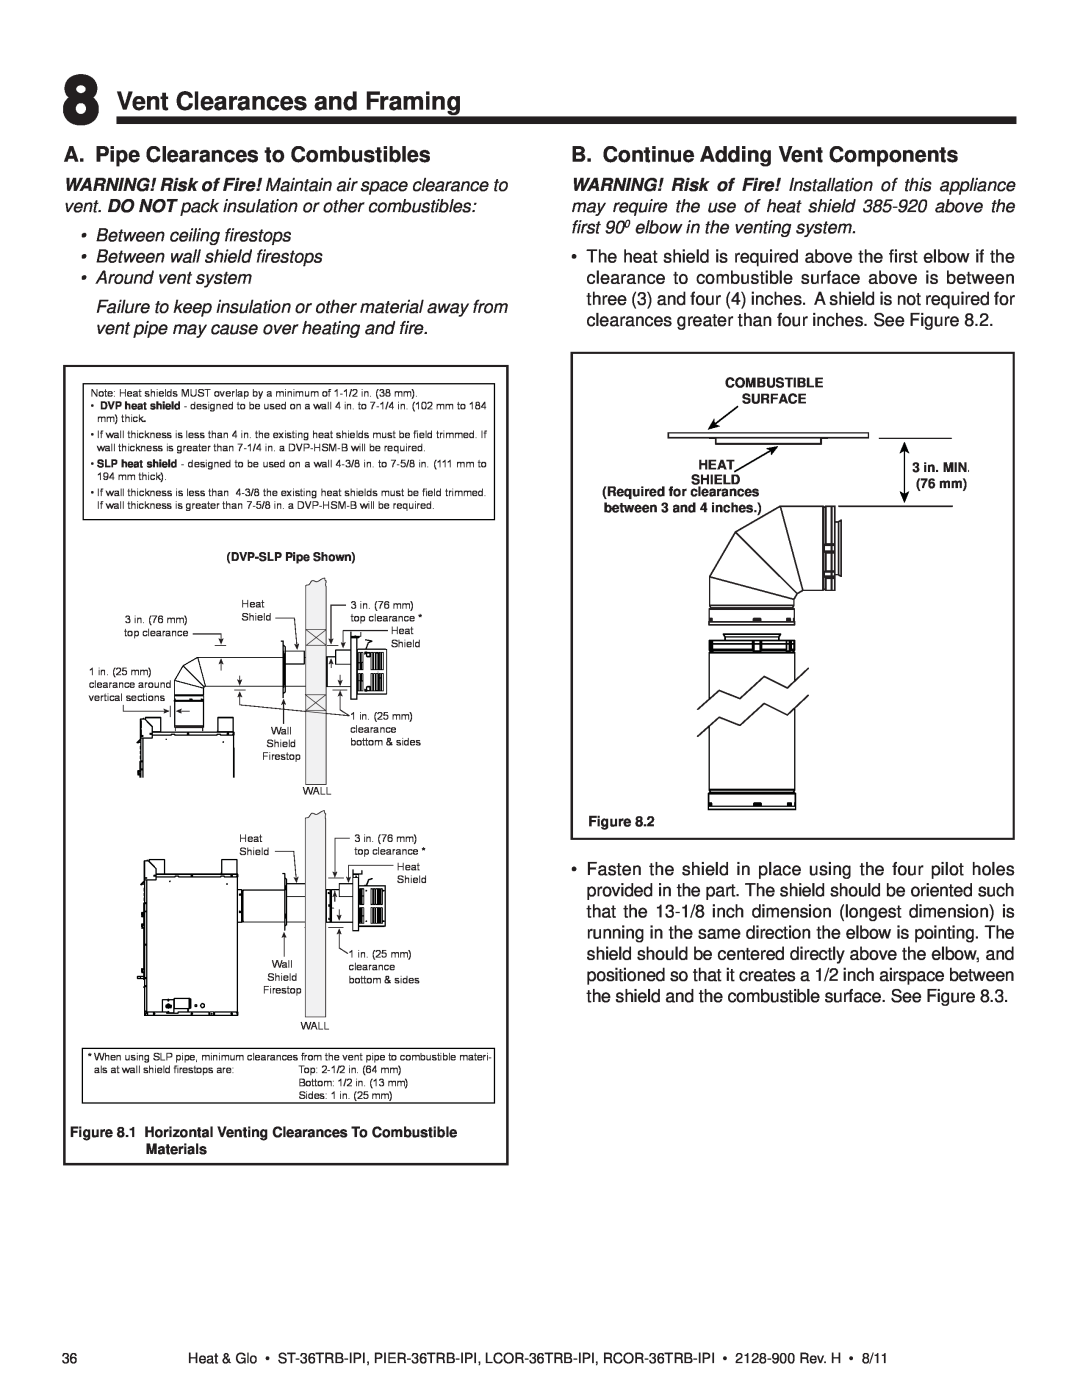 Heat & Glo LifeStyle ST-36TRB-IPI owner manual Vent Clearances and Framing, A. Pipe Clearances to Combustibles 